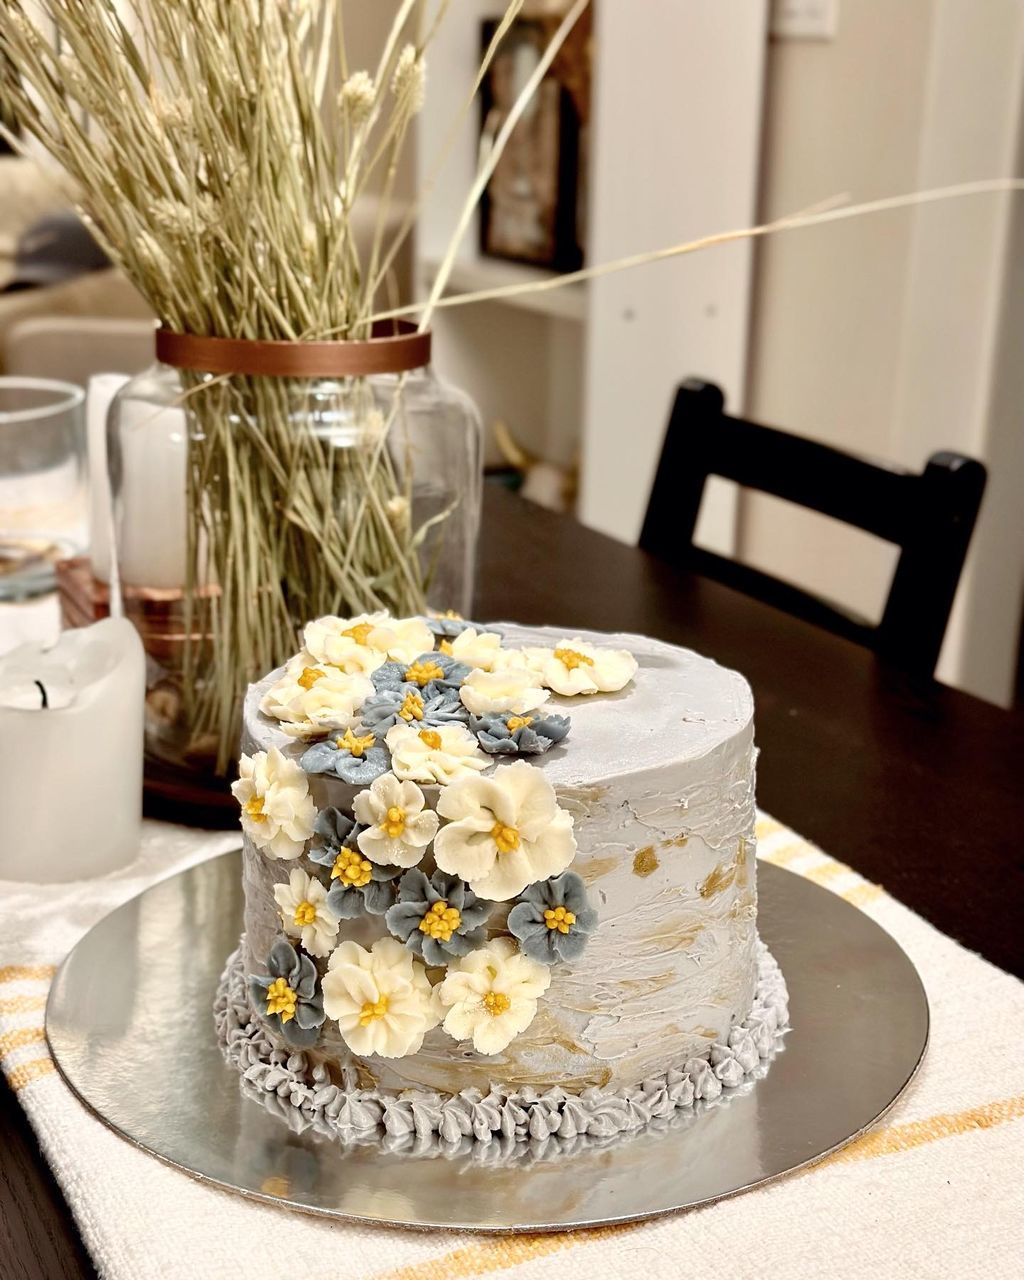 food and drink, birthday cake, wedding cake, table, food, flower, flowering plant, indoors, plant, freshness, yellow, no people, cake, decoration, icing, nature, centrepiece, sweet food, dessert, meal, celebration, home interior, baked, plate, sweet, chair, seat, domestic room, still life, event, vase